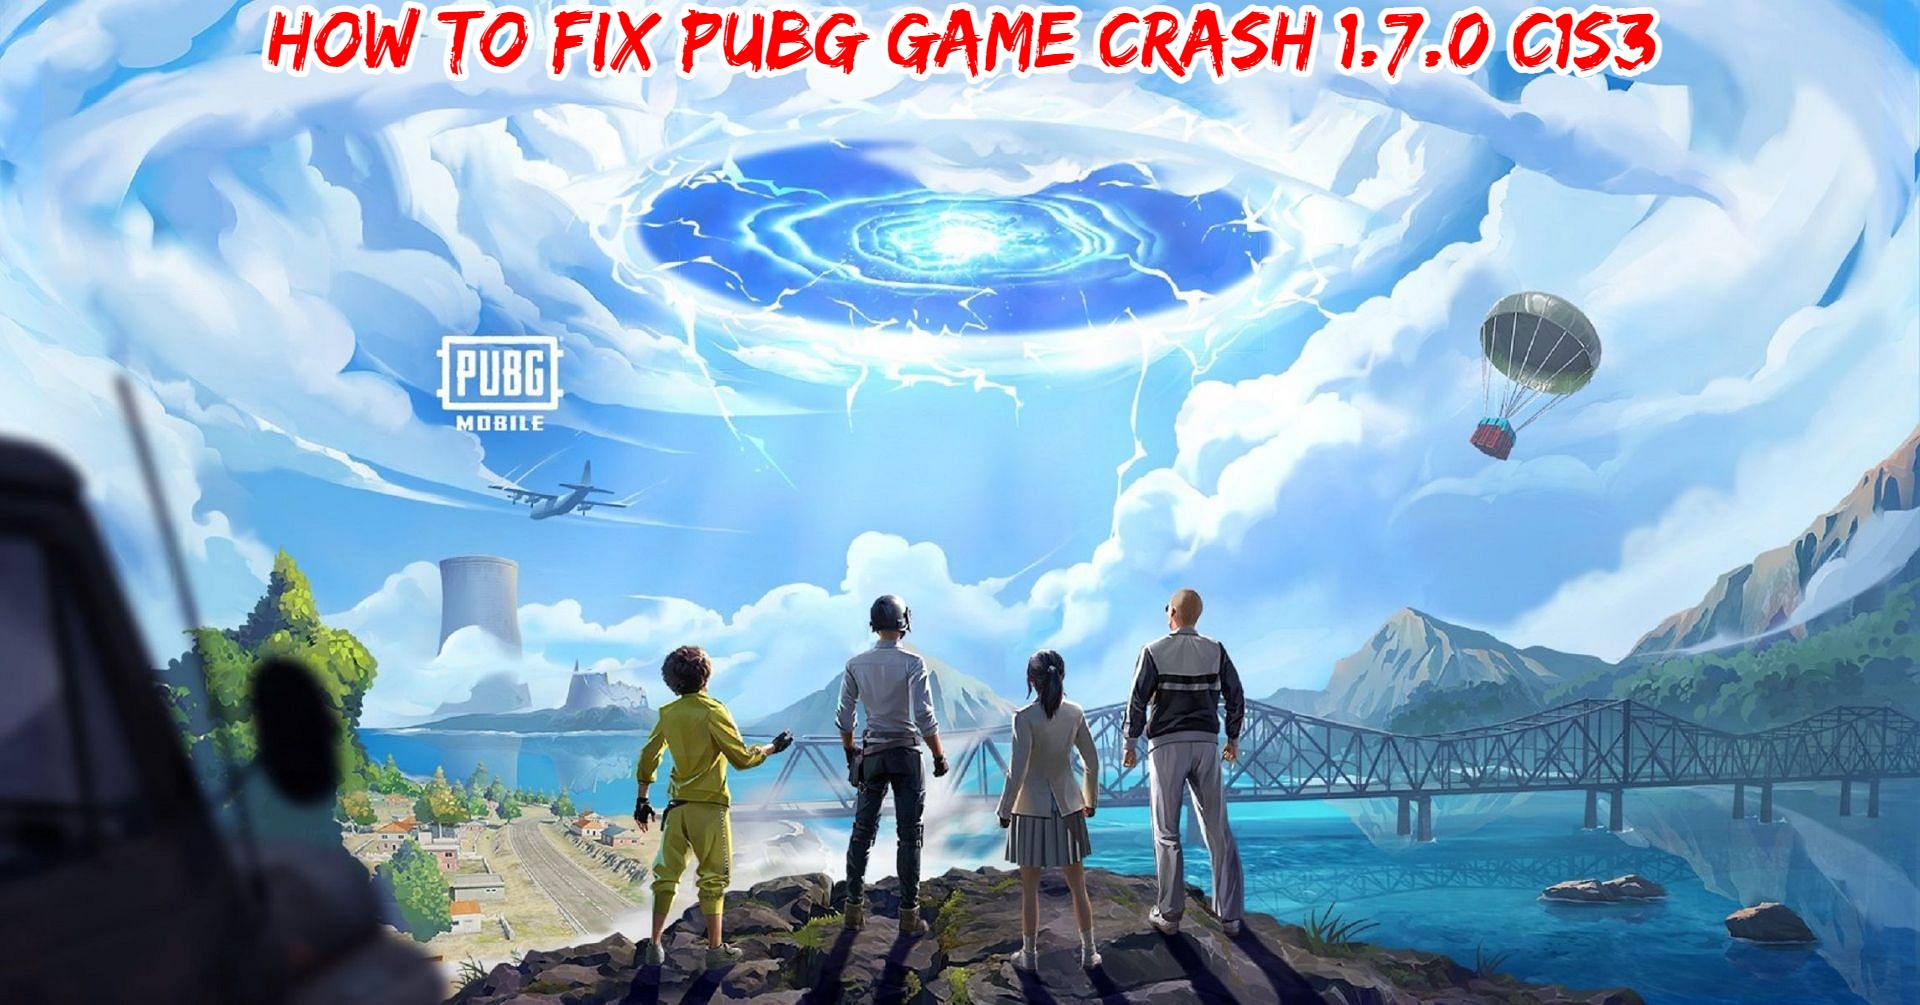 You are currently viewing How To Fix PUBG Game Crash 1.7.0 C1S3